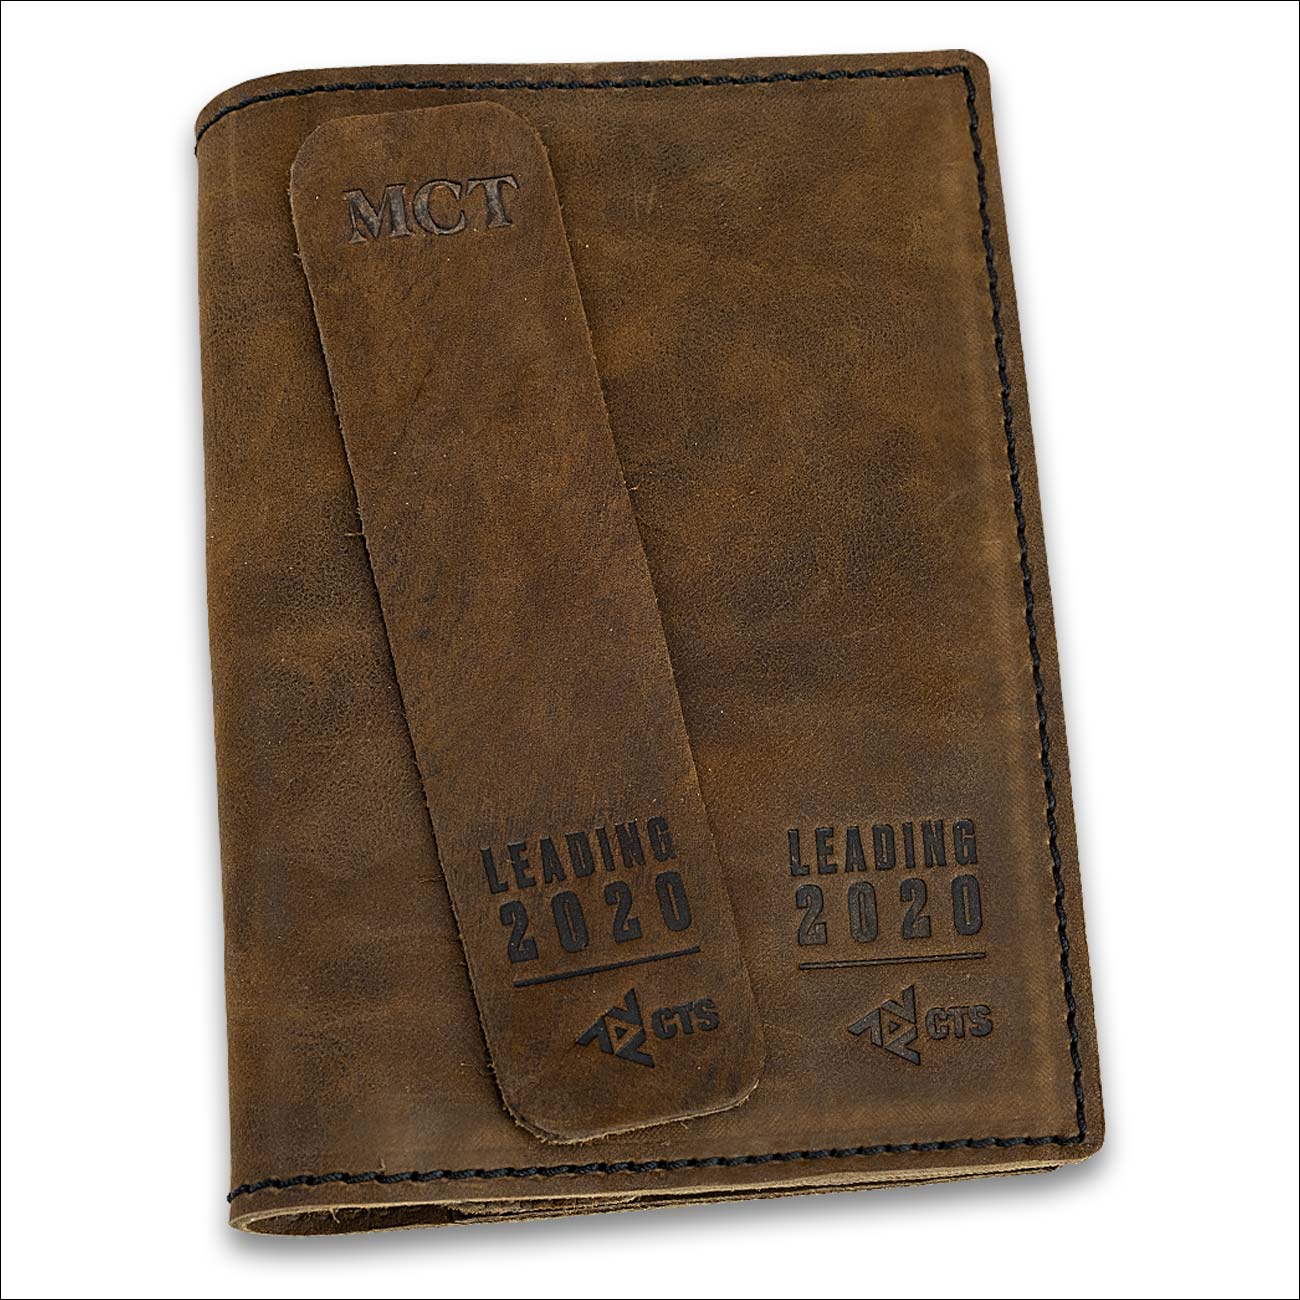 Slim Leather Pouch - Innovative Journaling